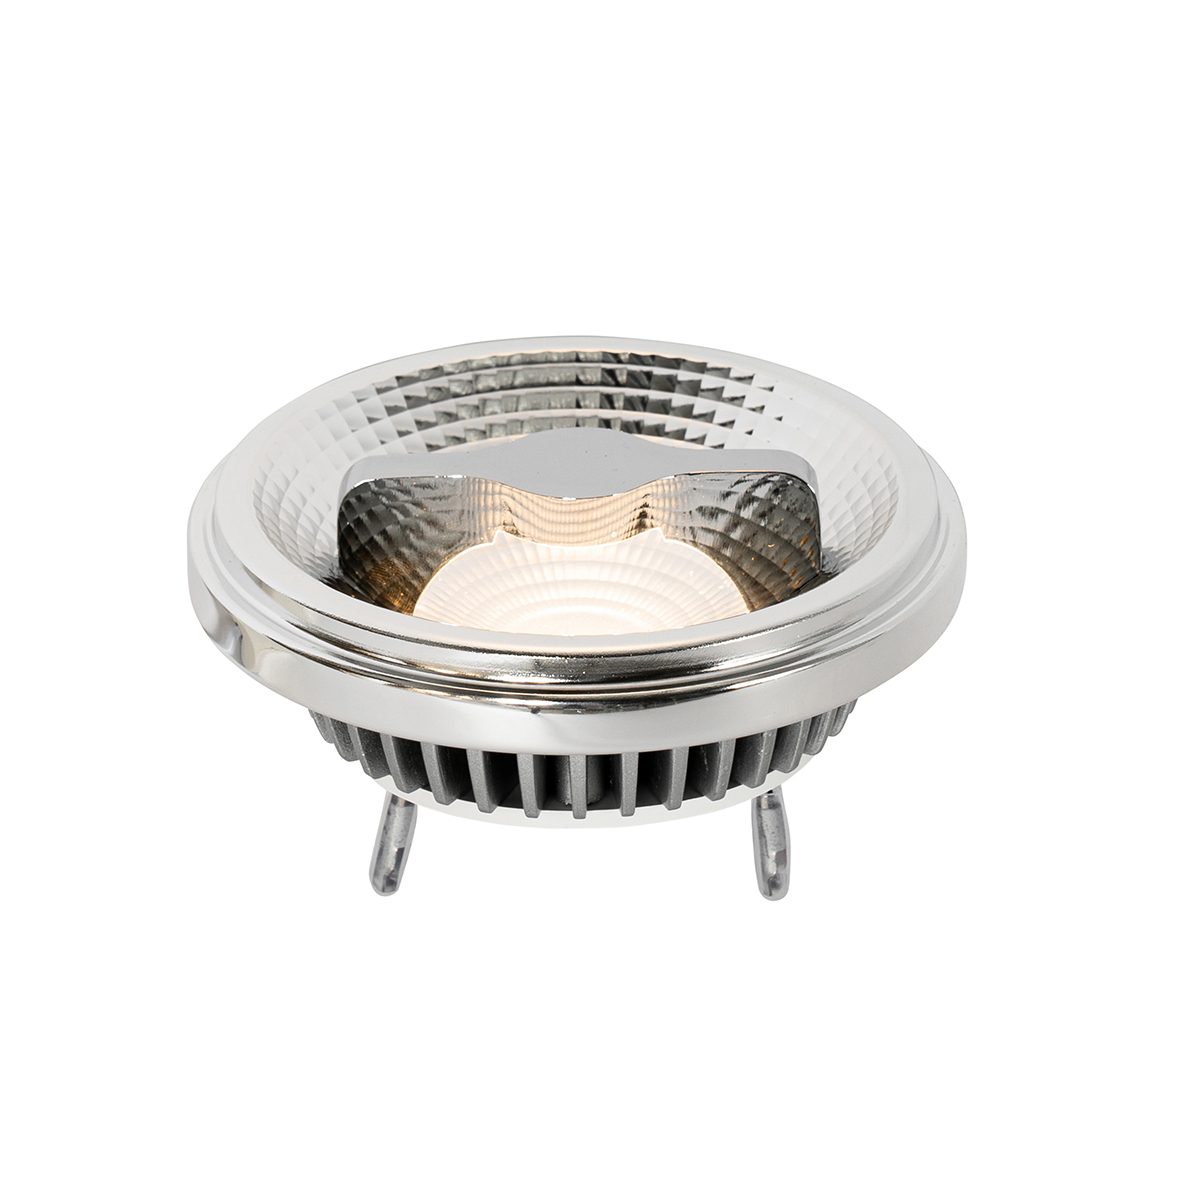 G53 dimmable LED lamp AR111 12W 600 lm 2700K